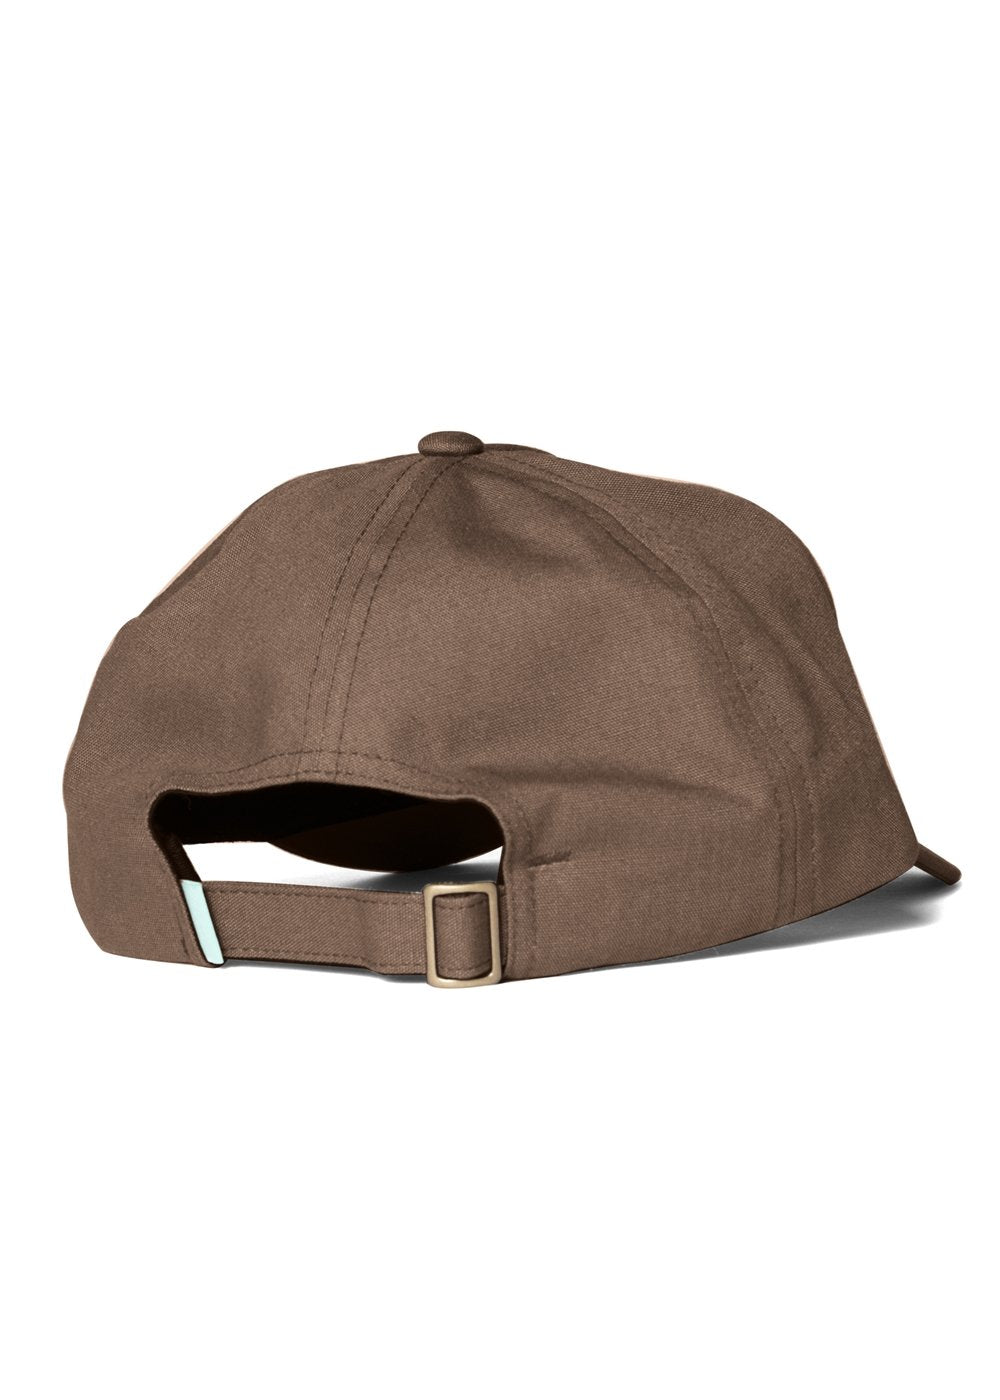 Undefined Lines Hat